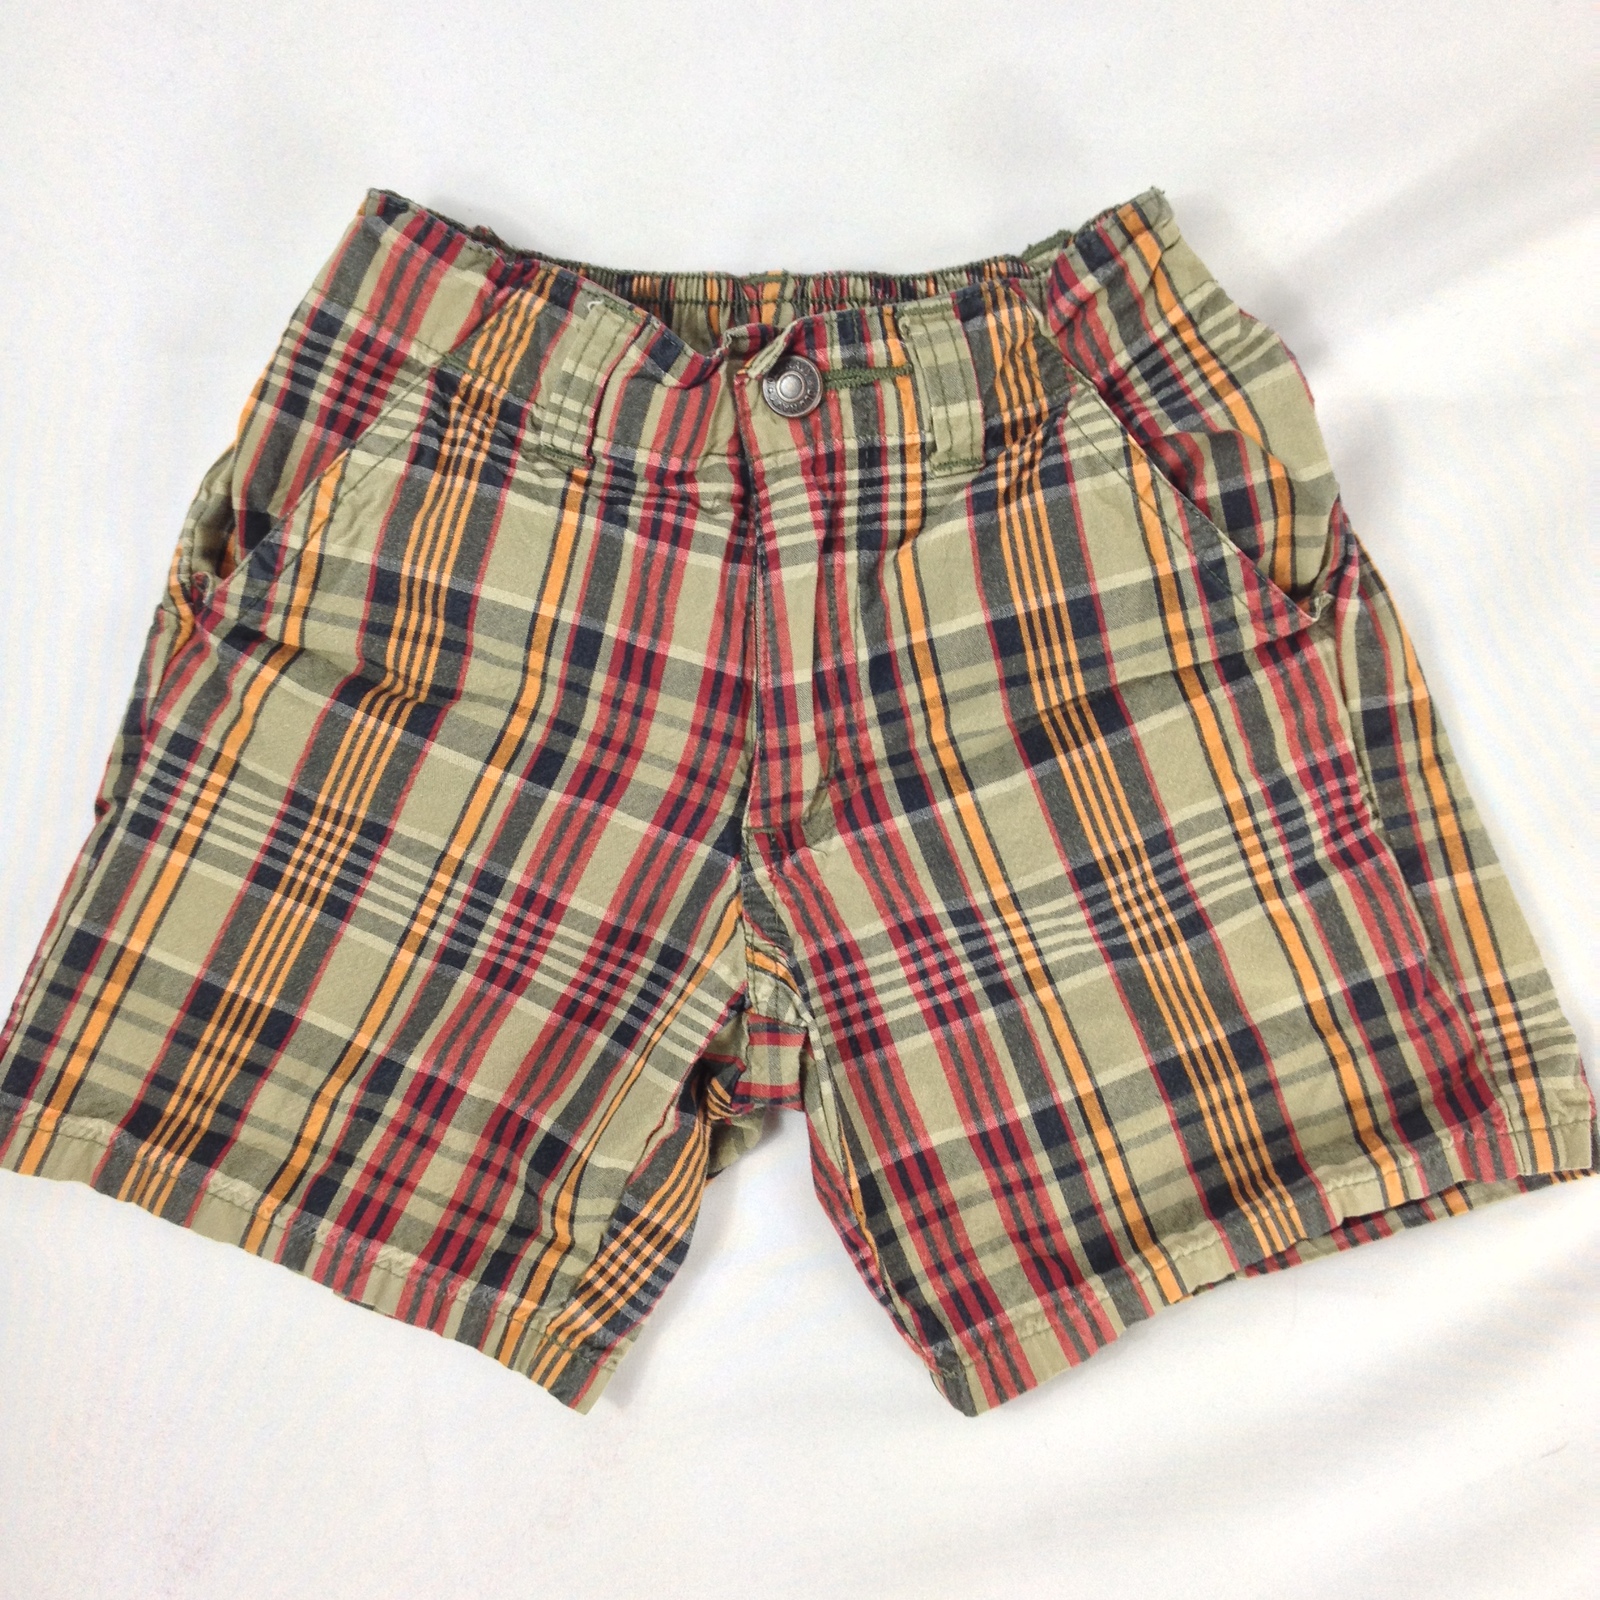 Primary image for Old Navy Toddler Boy's Multicolor Plaid Elastic Waist Shorts Size 2T